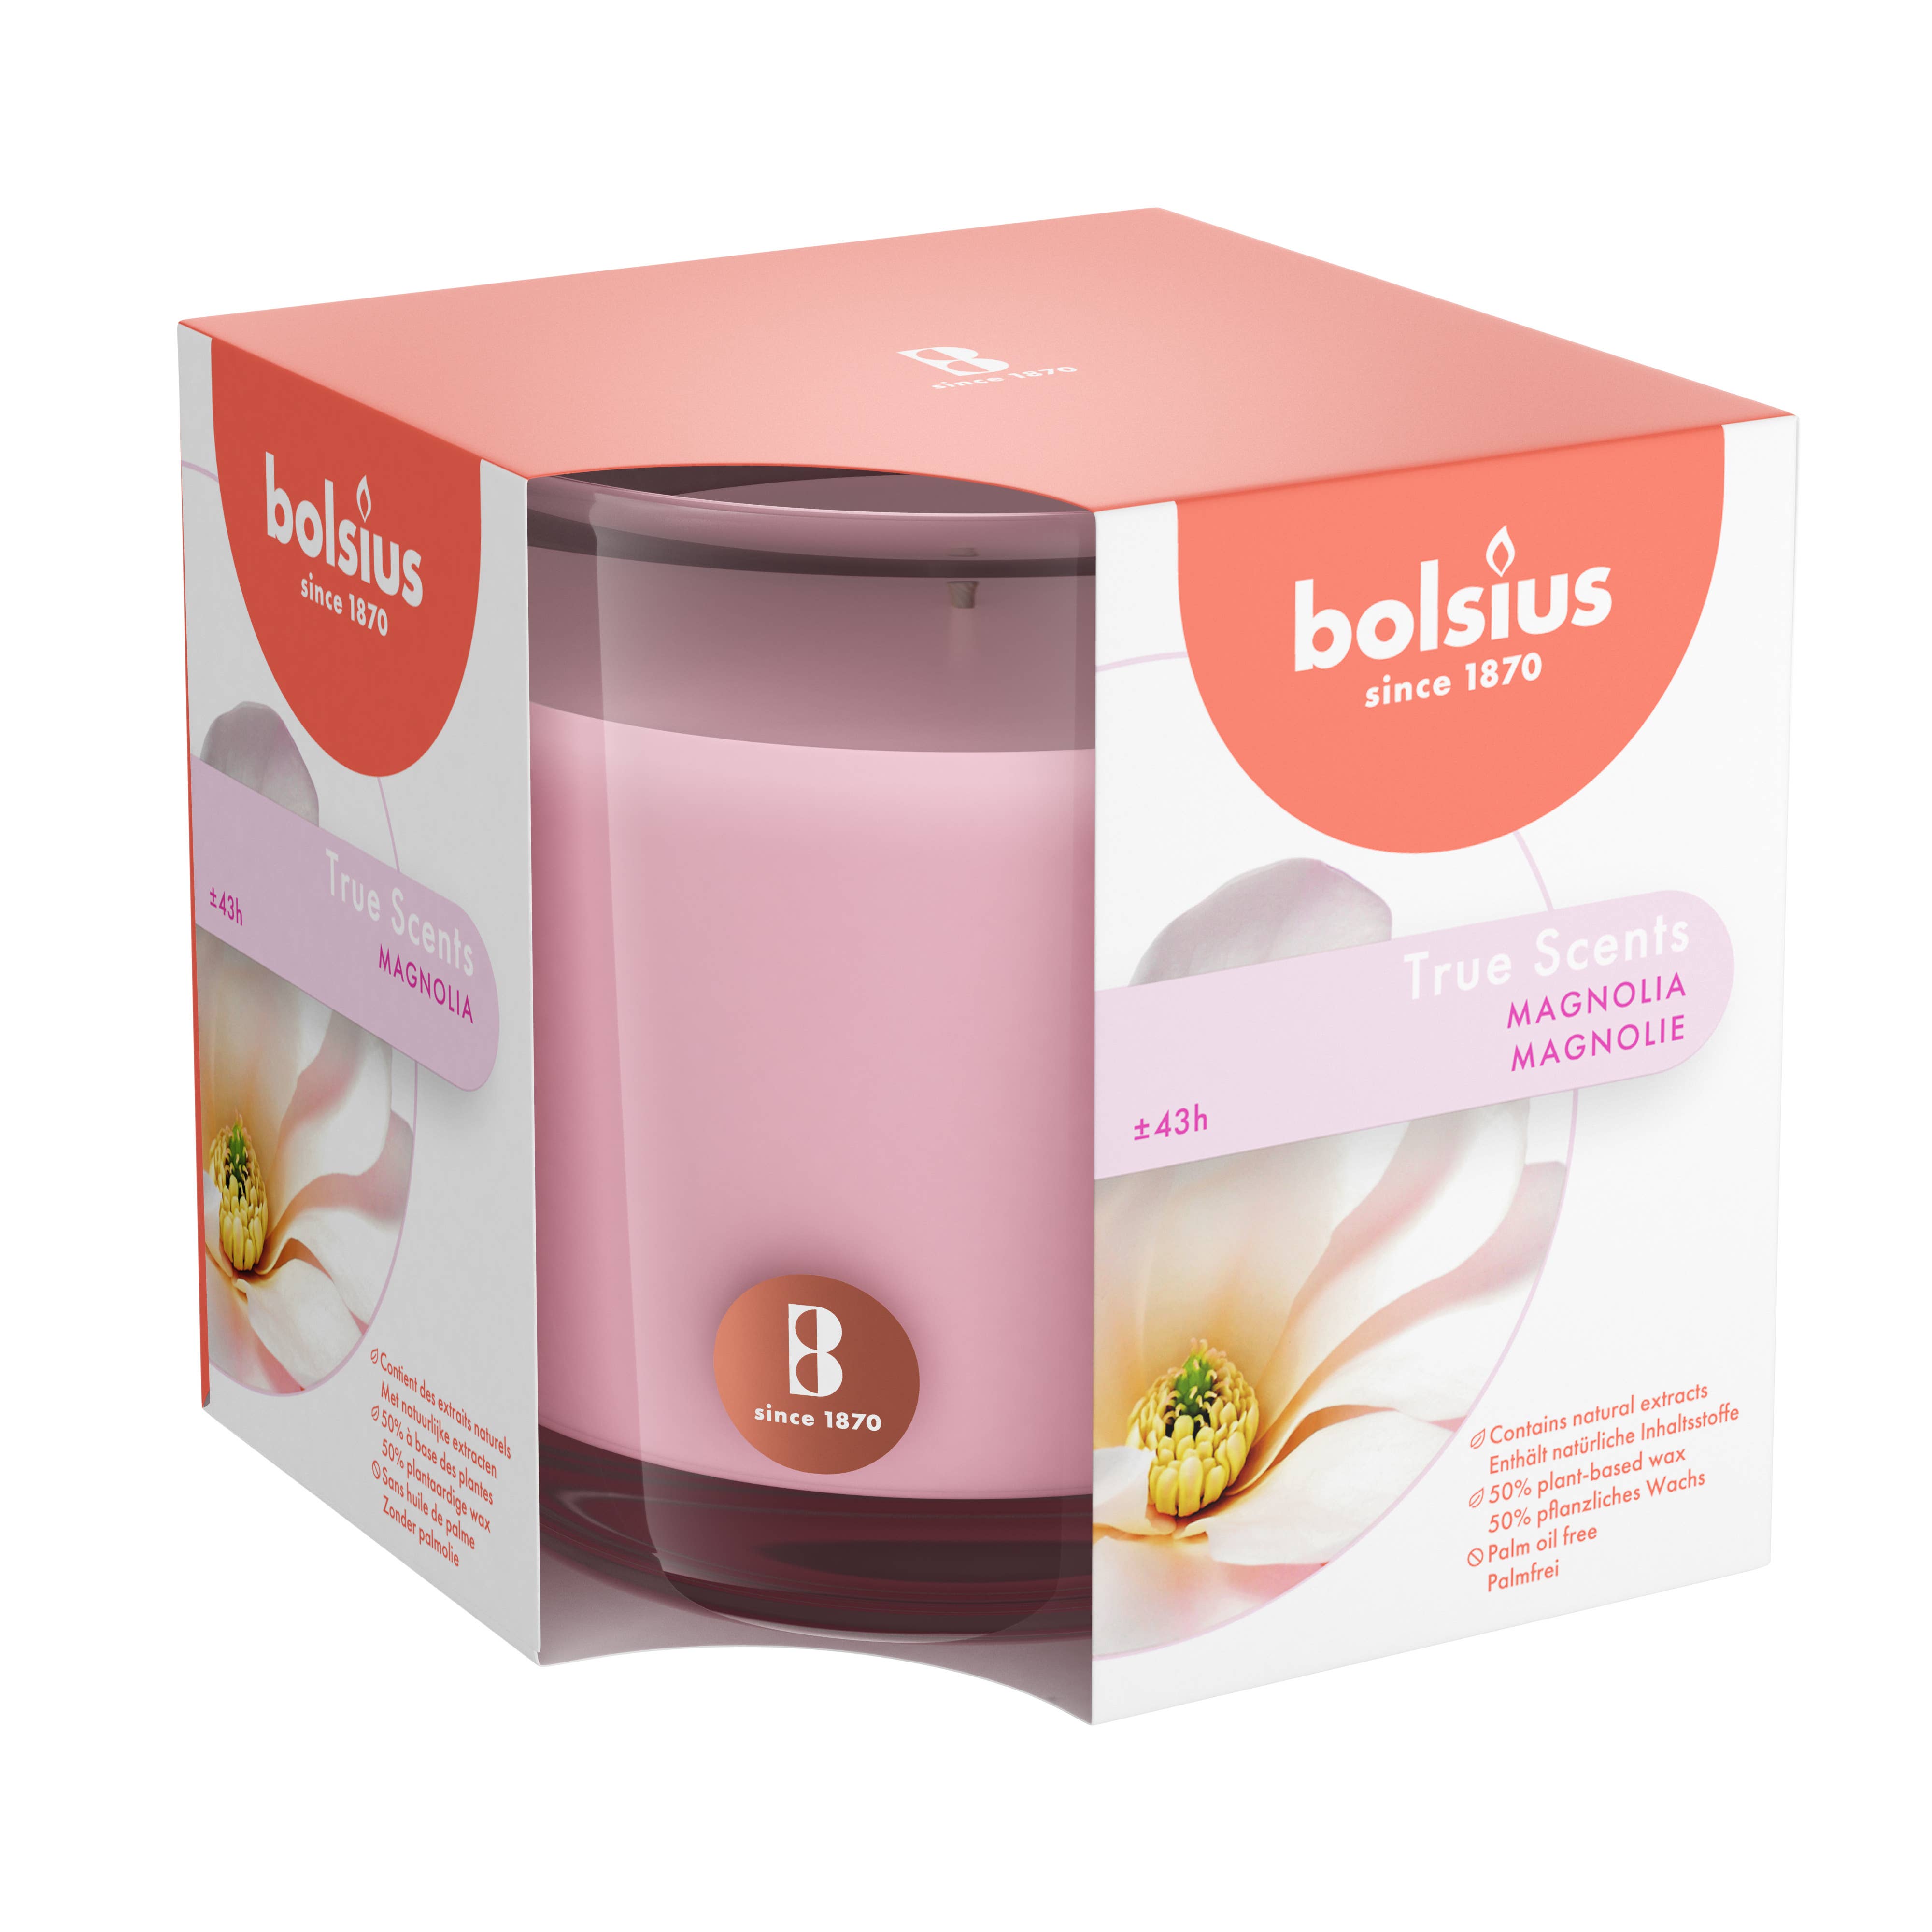 Candle: Magnolia Scented Candle - 3.75 x 3.75 Inches - 43